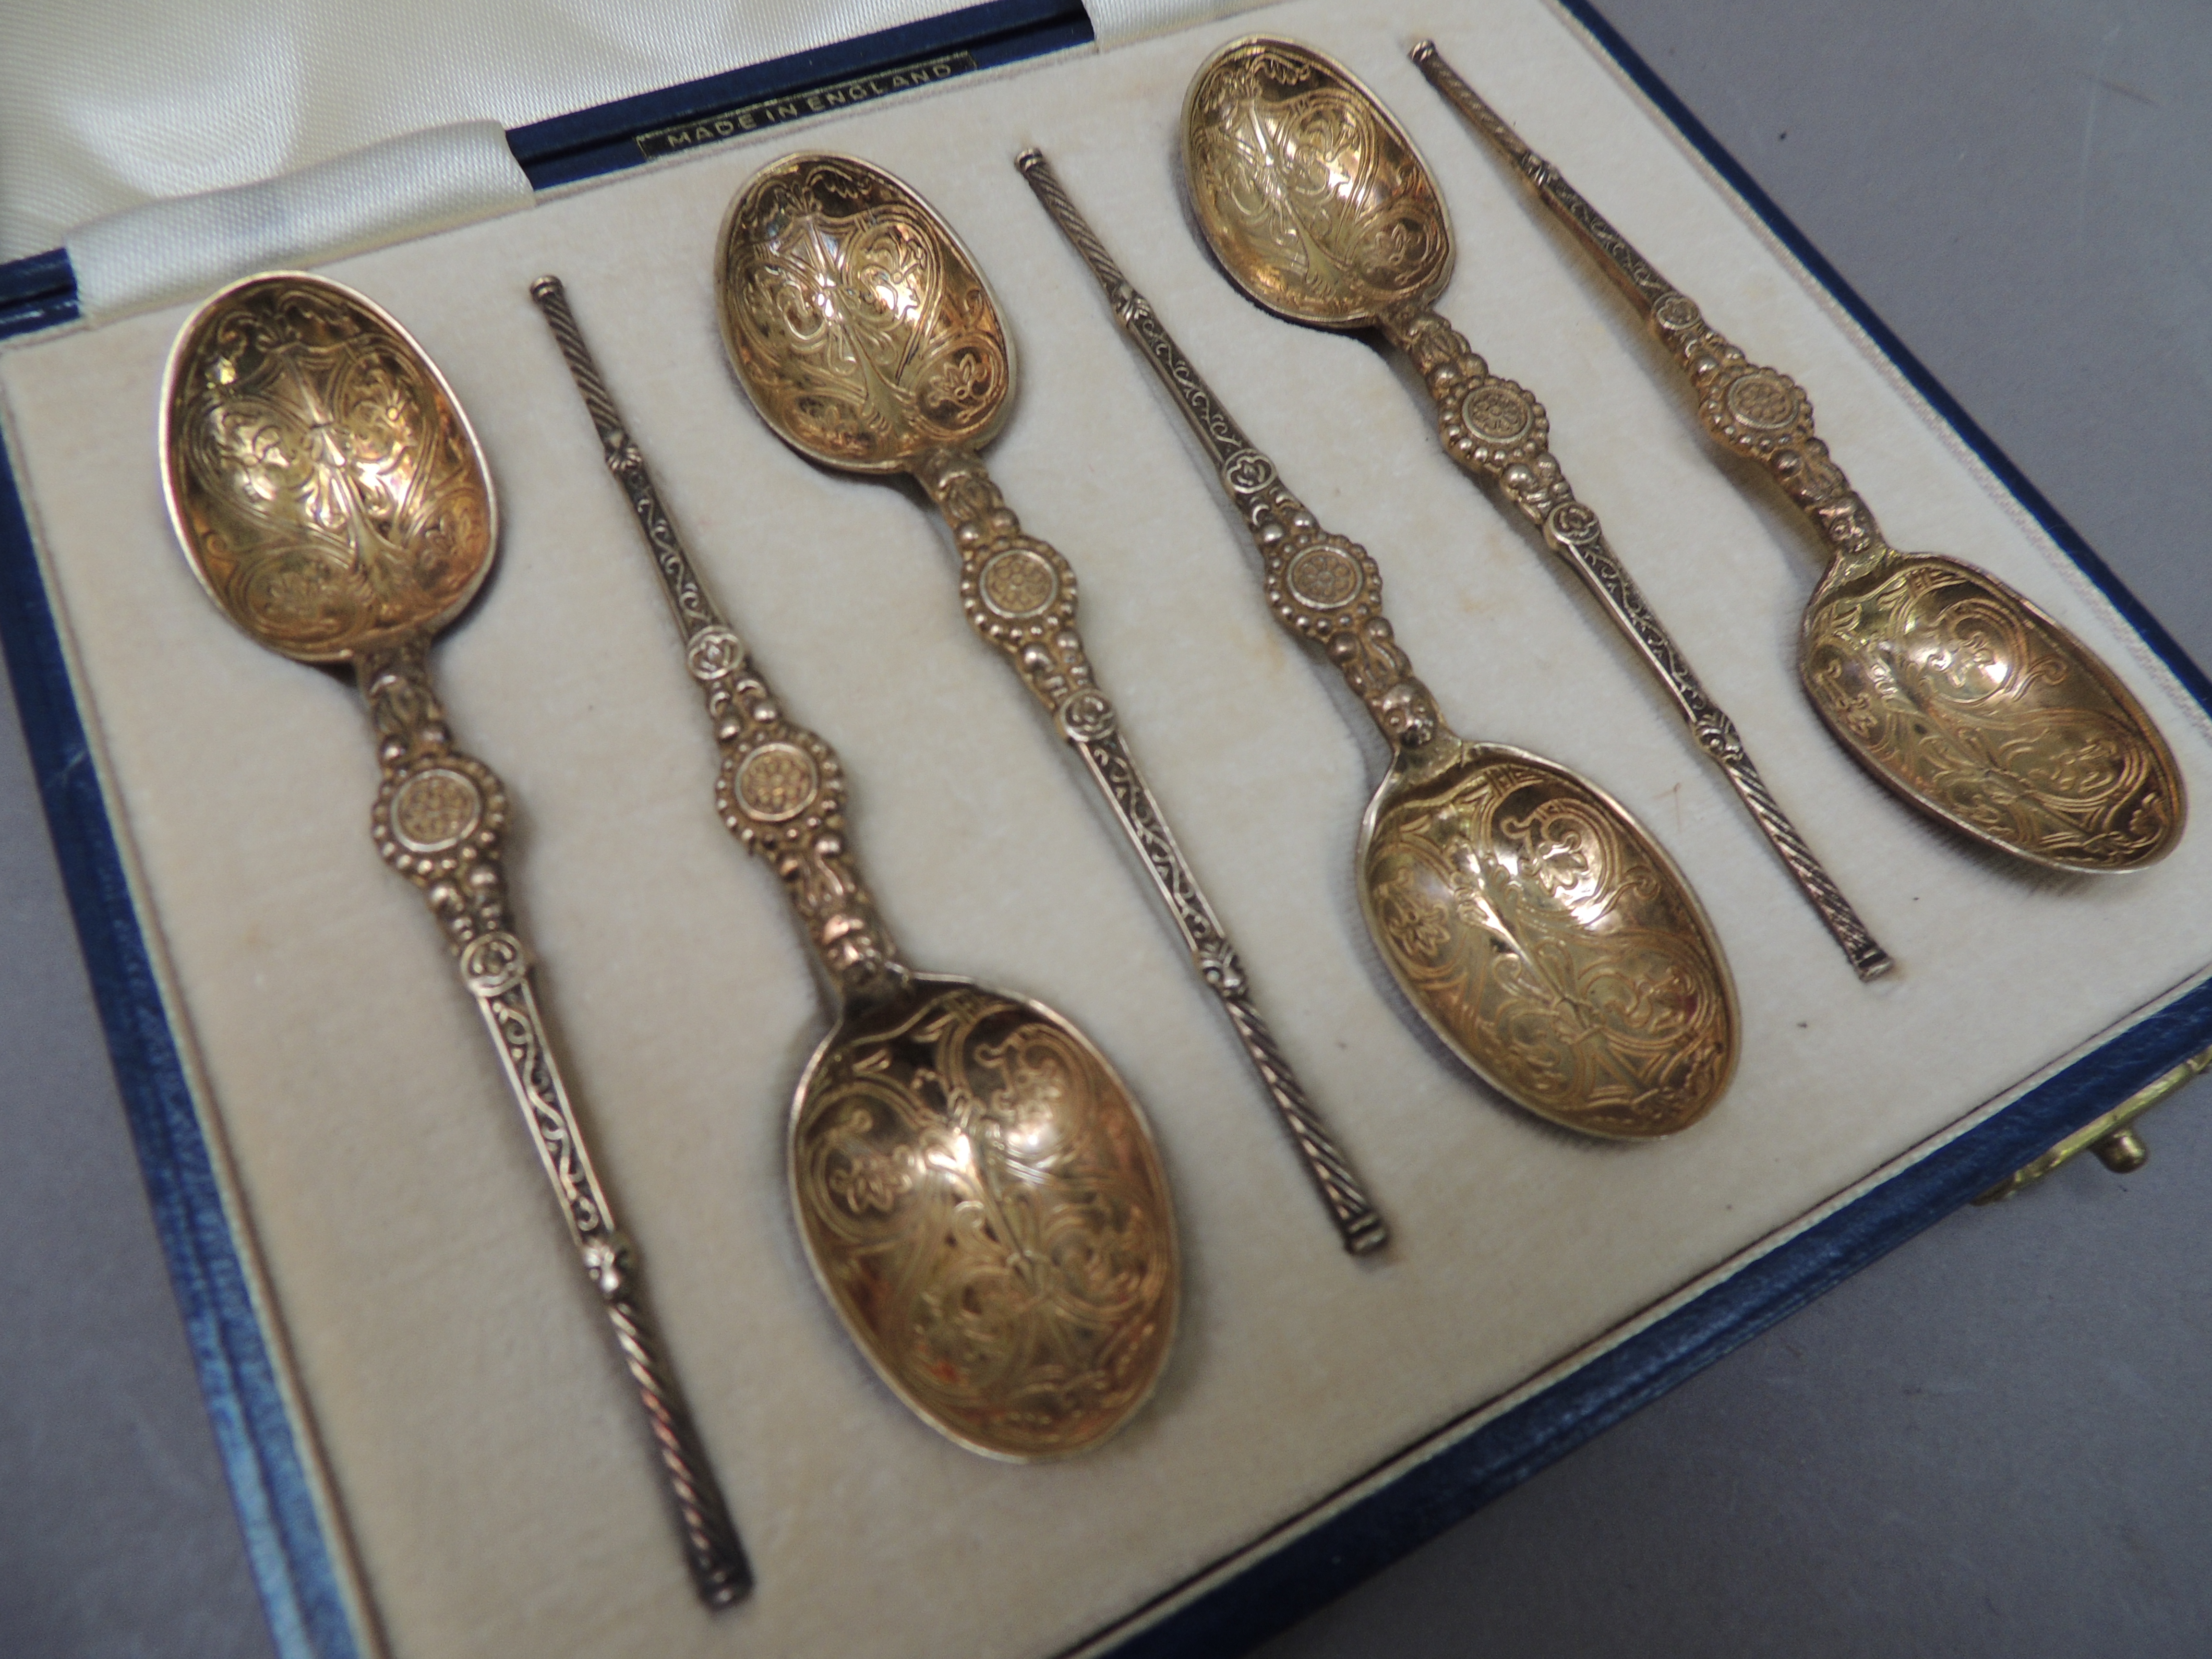 A cased set of silver gilt teaspoons in Elizabethan style with engraved bowls and cast tapered stems